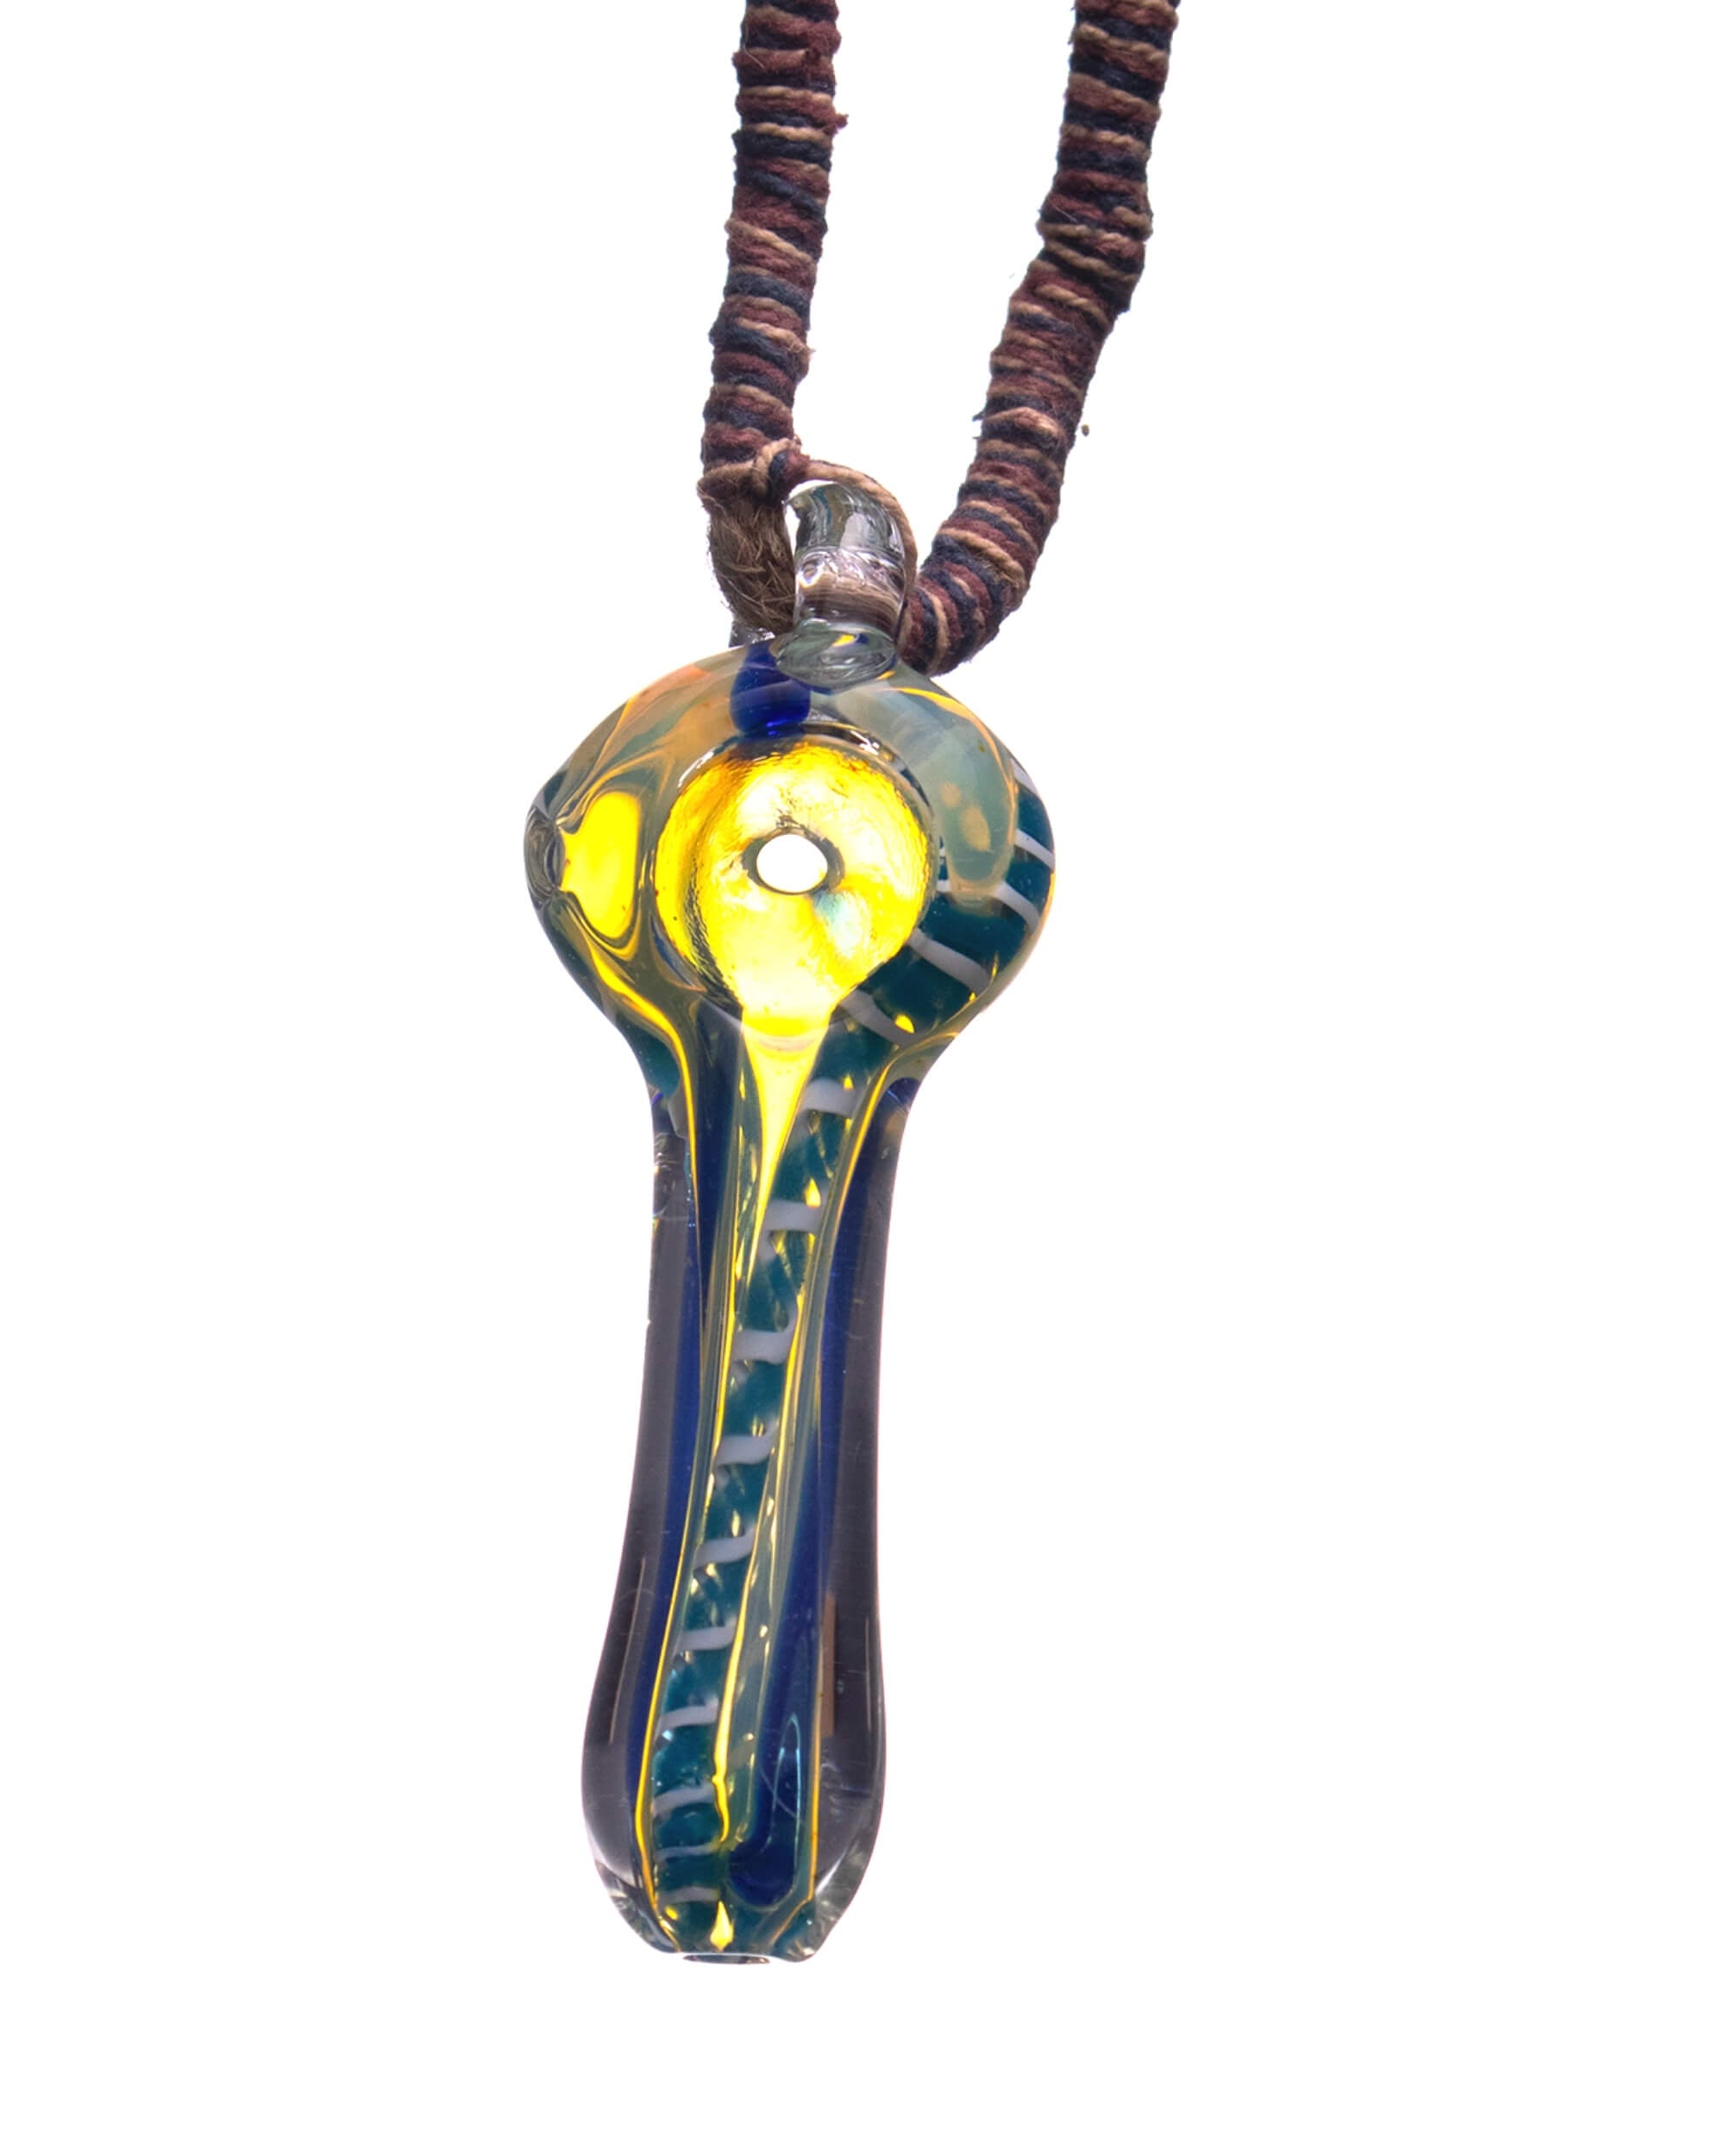 Buy Necklace Spoon: Snuff Bottles & Spoons from Shiva Online